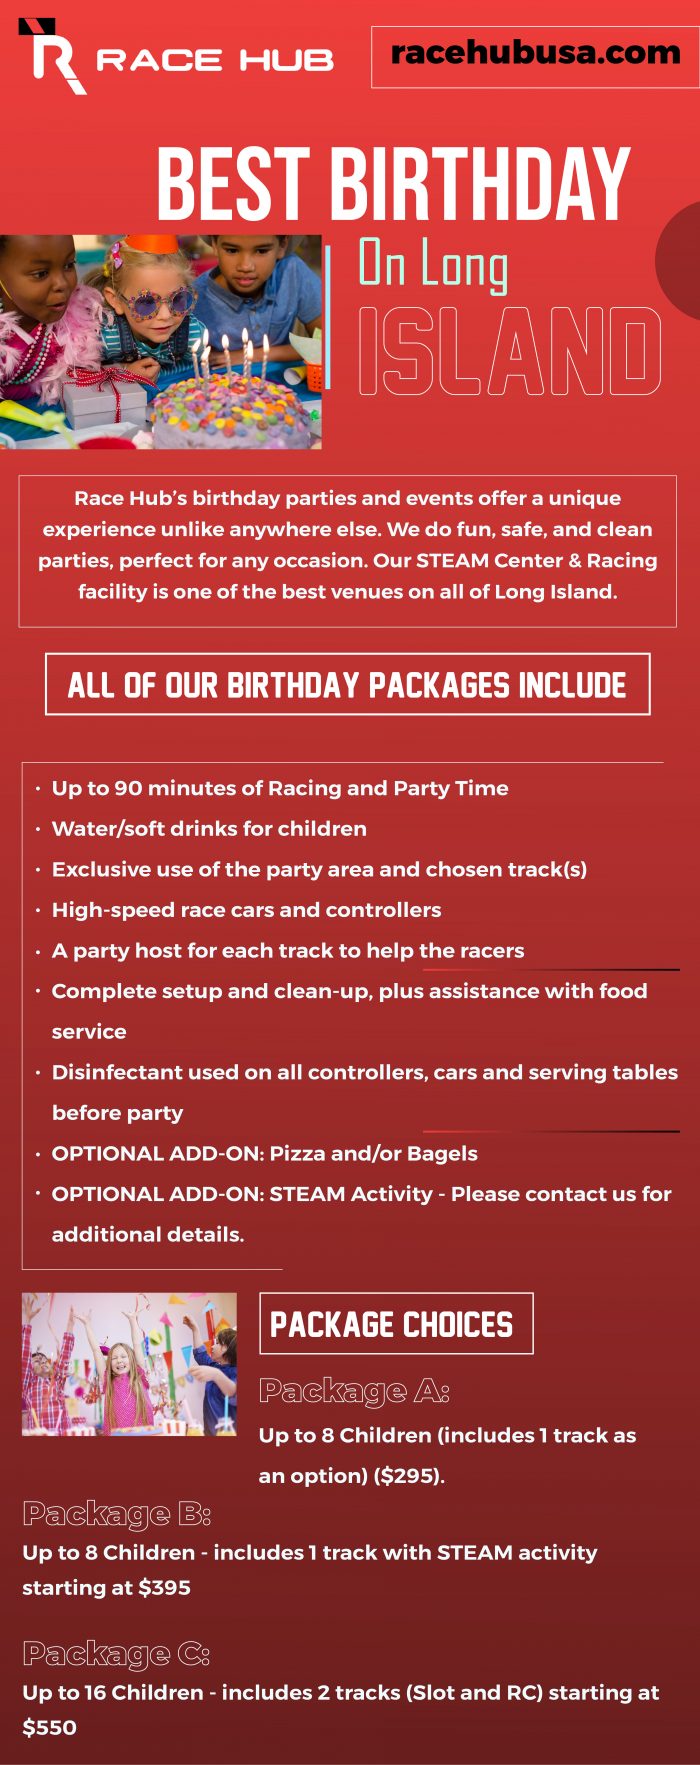 Want to enjoy your Best birthday on long island? Contact Race Hub.